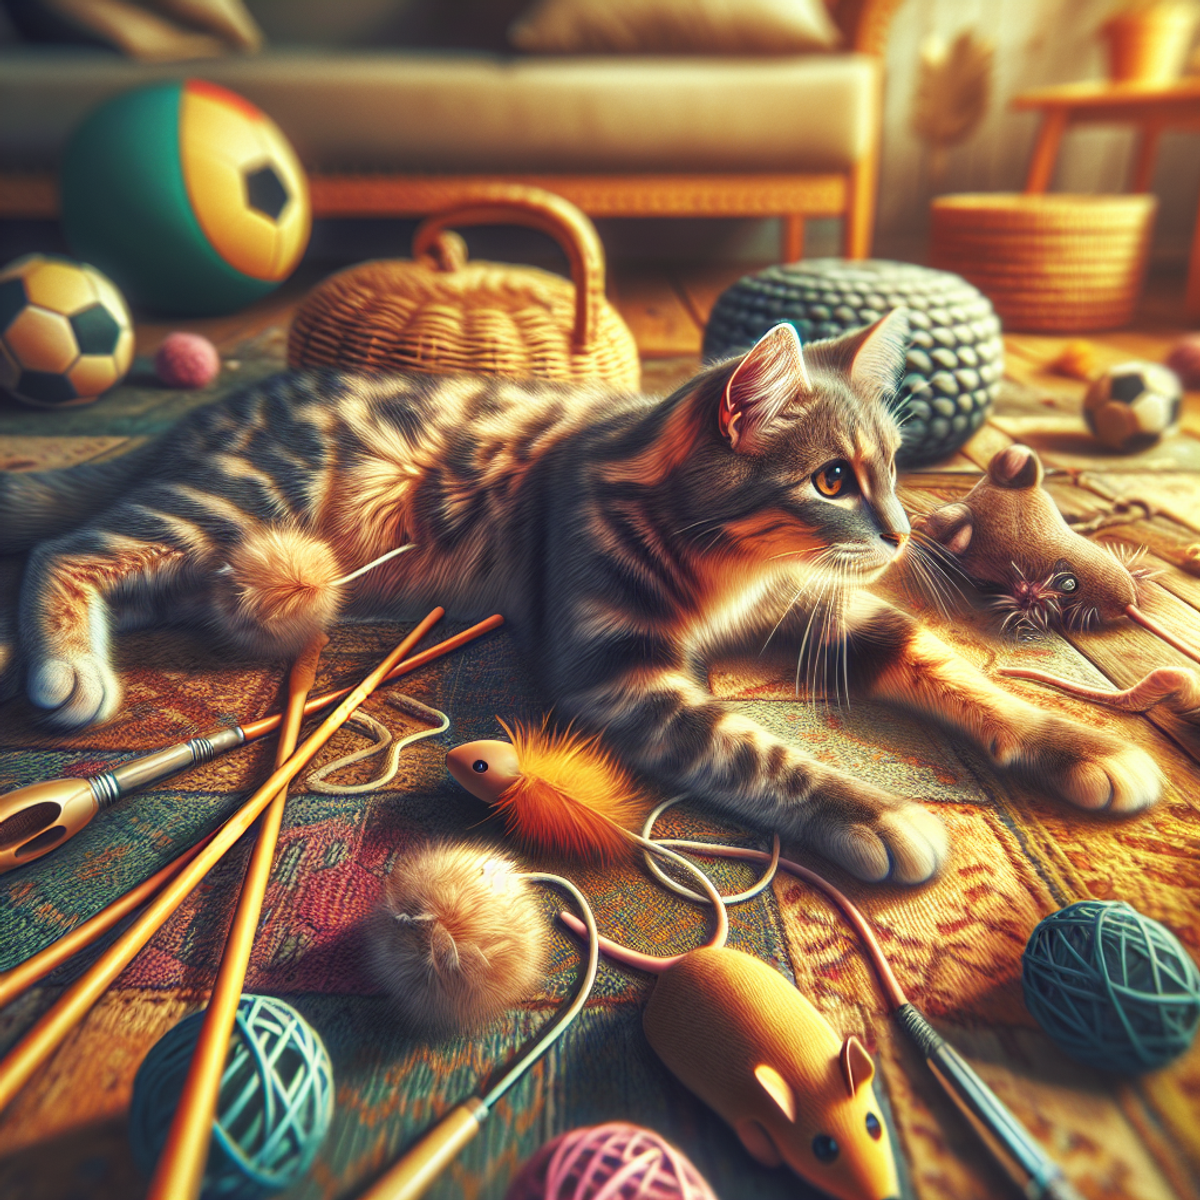 A playful tabby cat surrounded by feather wands, balls, and plush mice in a cozy, warm environment.